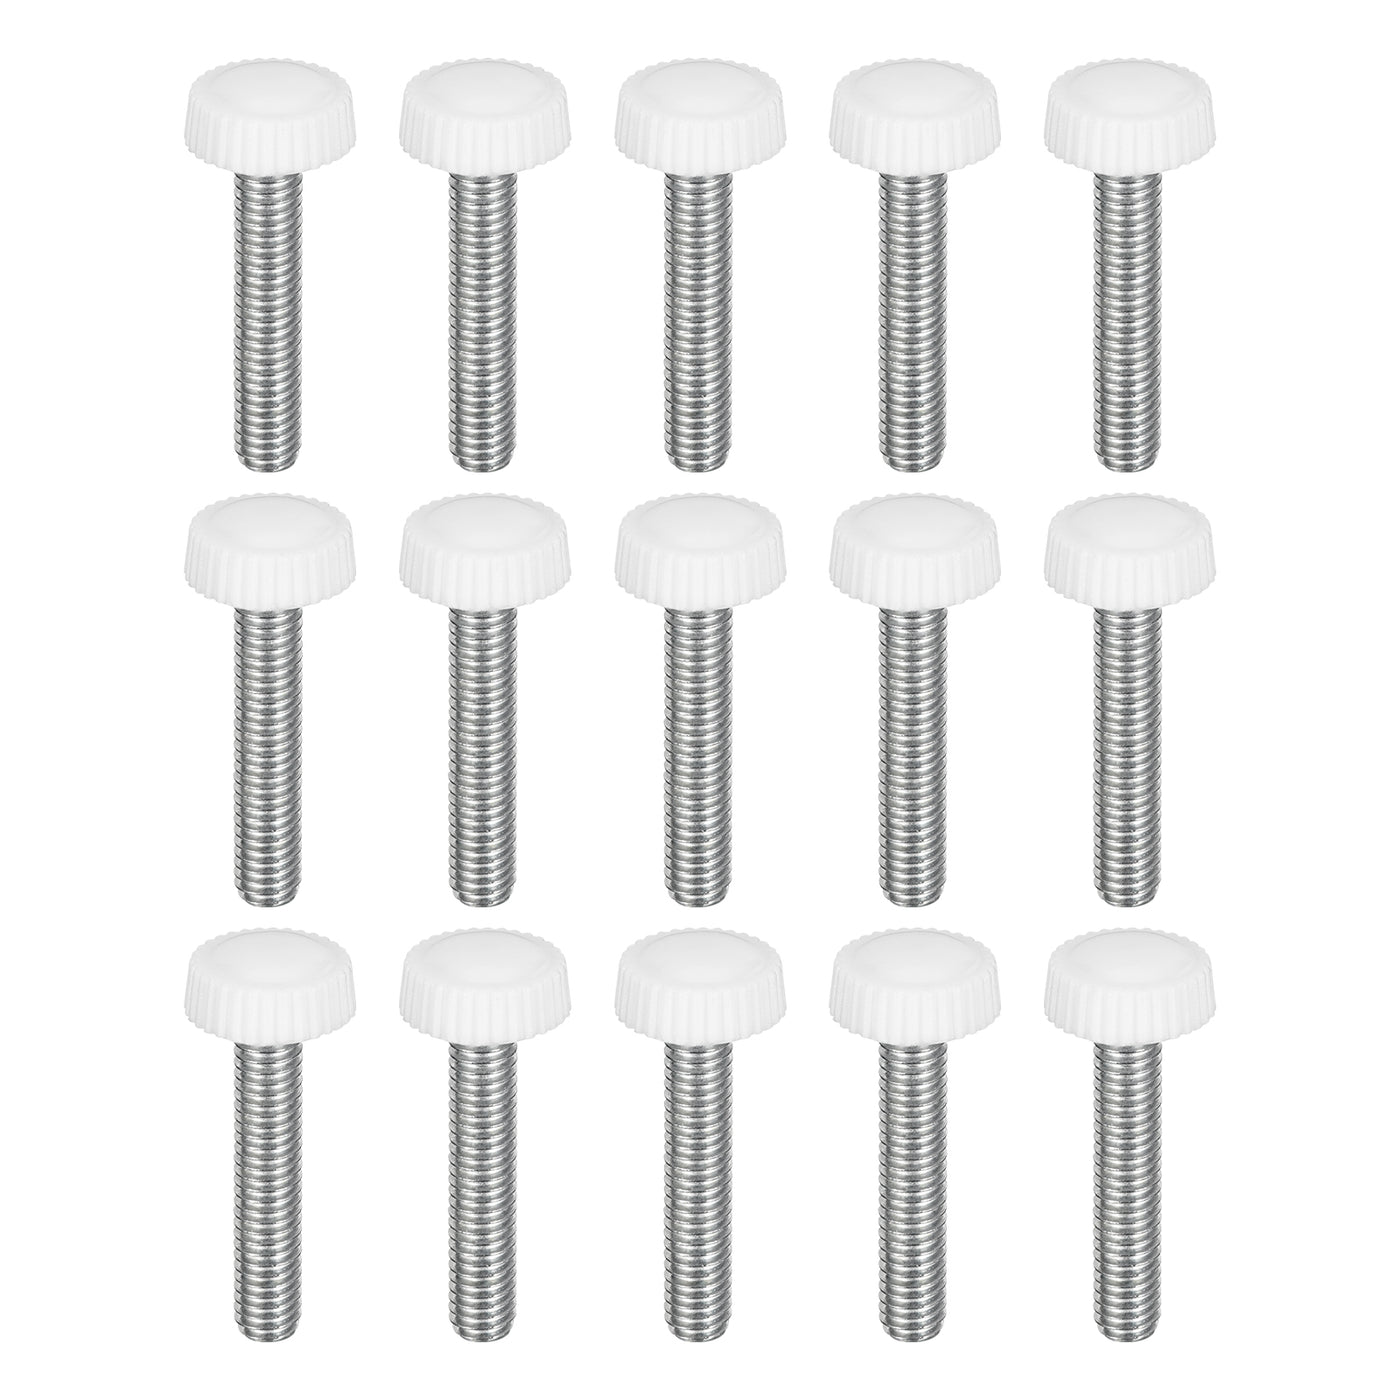 uxcell Uxcell 25Pcs M6x30mm Threaded Knurled Thumb Screws, Zinc Plated Carbon Steel White